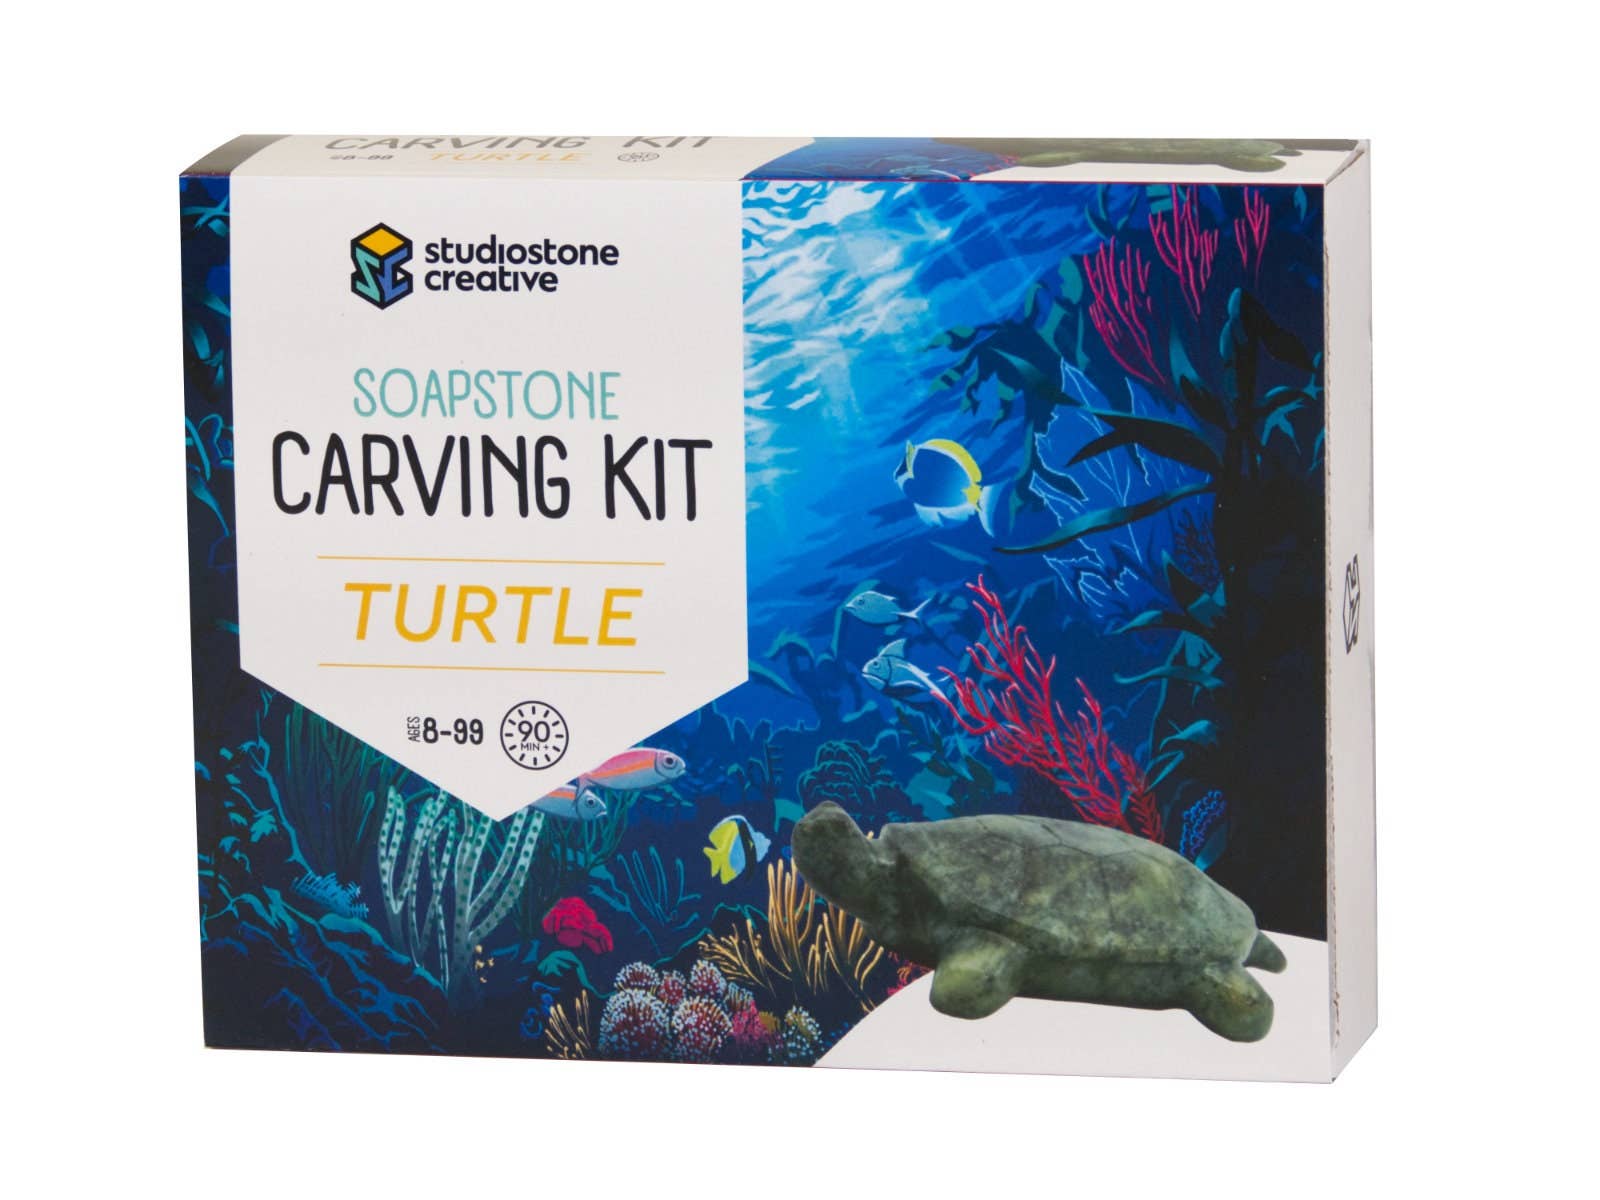 Studiostone Creative - Turtle Soapstone Carving & Whittling—DIY Arts and Craft Kit. All Kid-Safe Tools and Materials Included. For kids and adults 8 to 99+ Years.